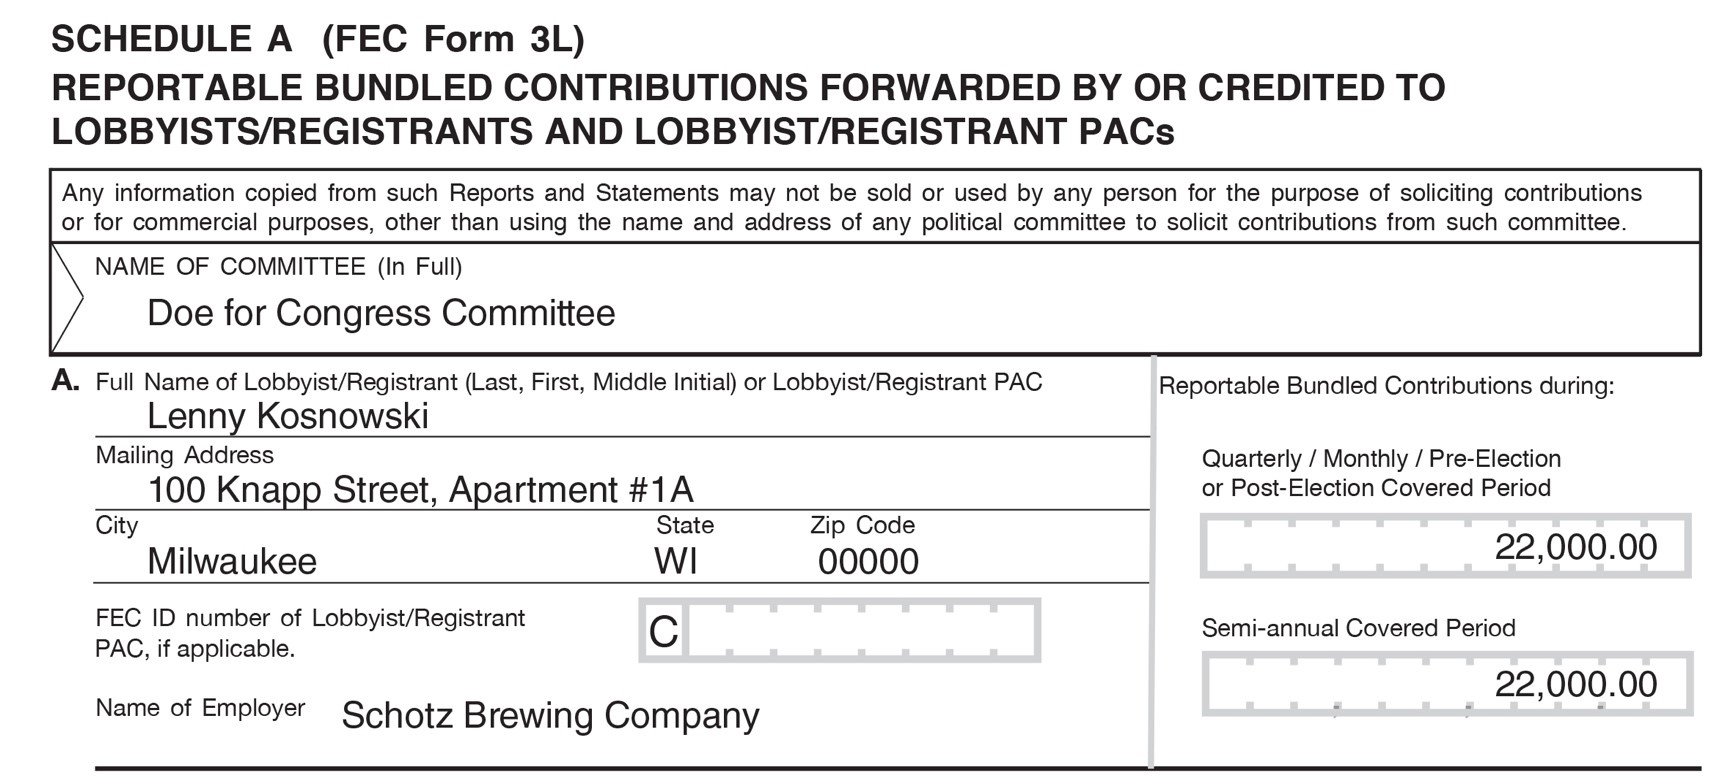 Example of FEC Form 3L illustrating how to disclose the identification of a lobbyist/registrant who has forwarded or been credited with bundling contributions